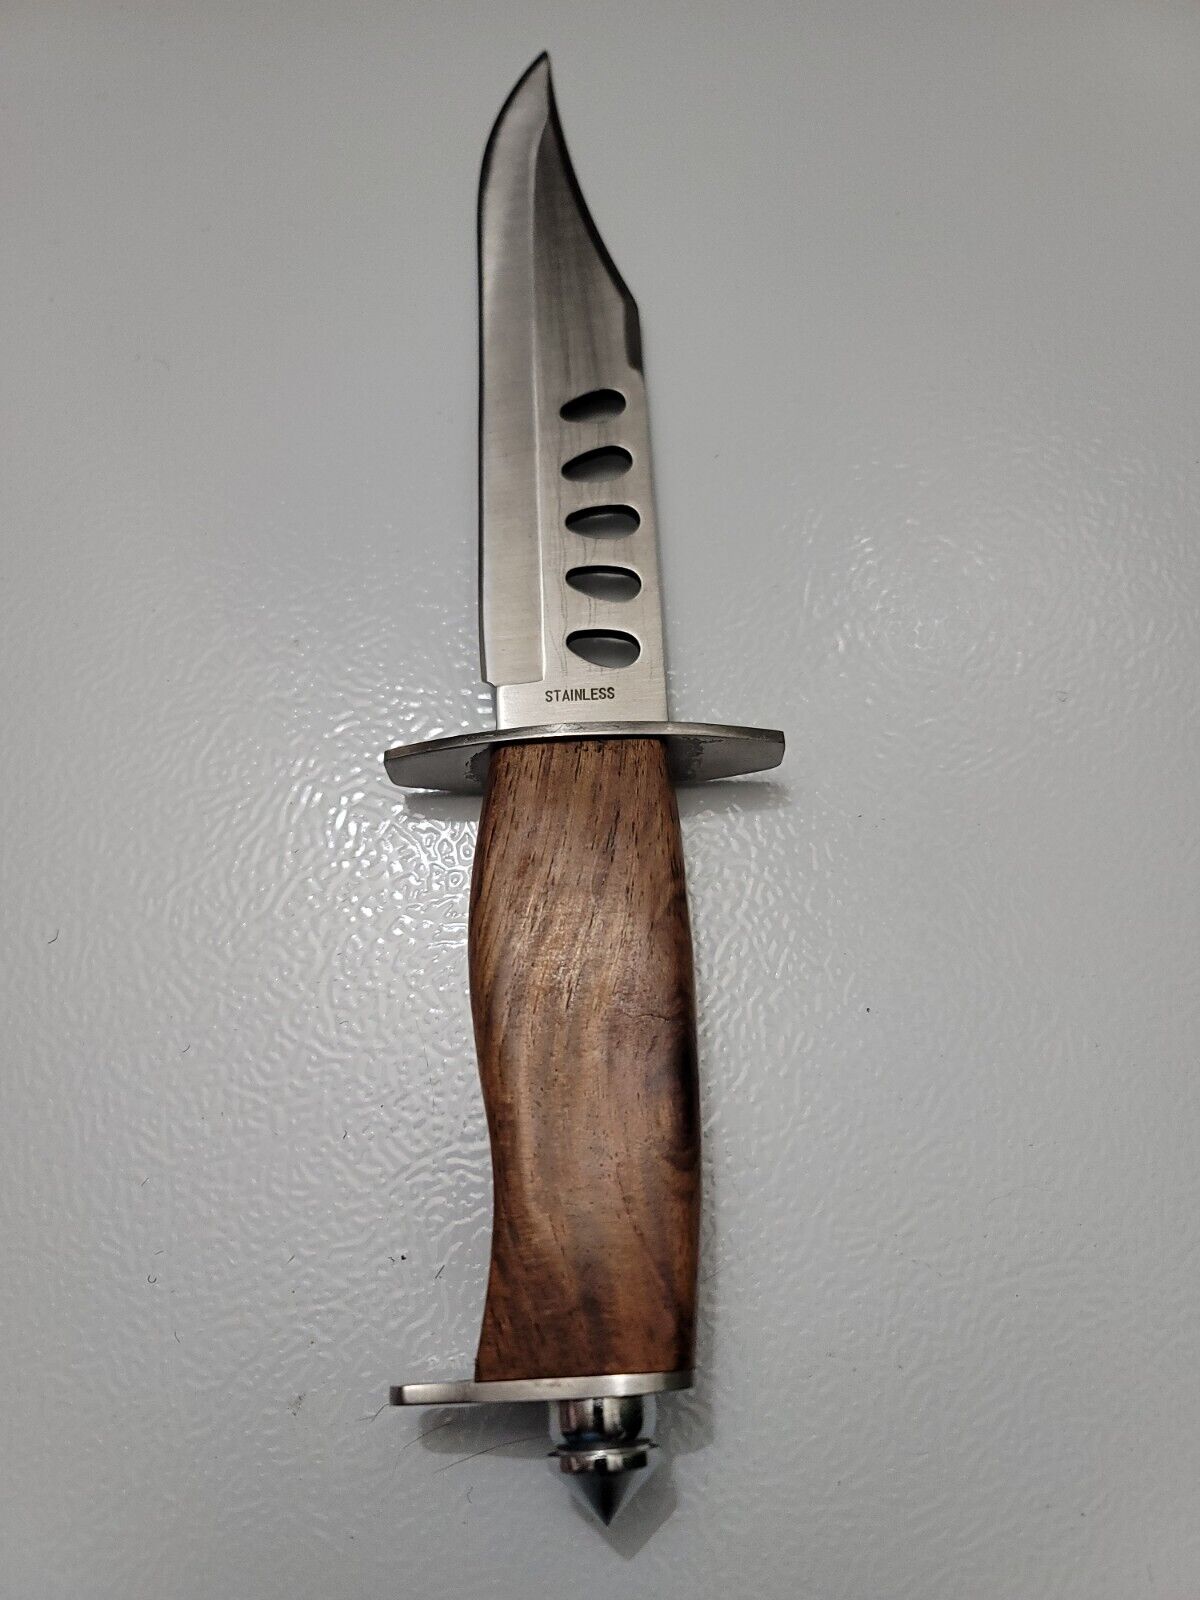 Stainless Steel Hunting Knife